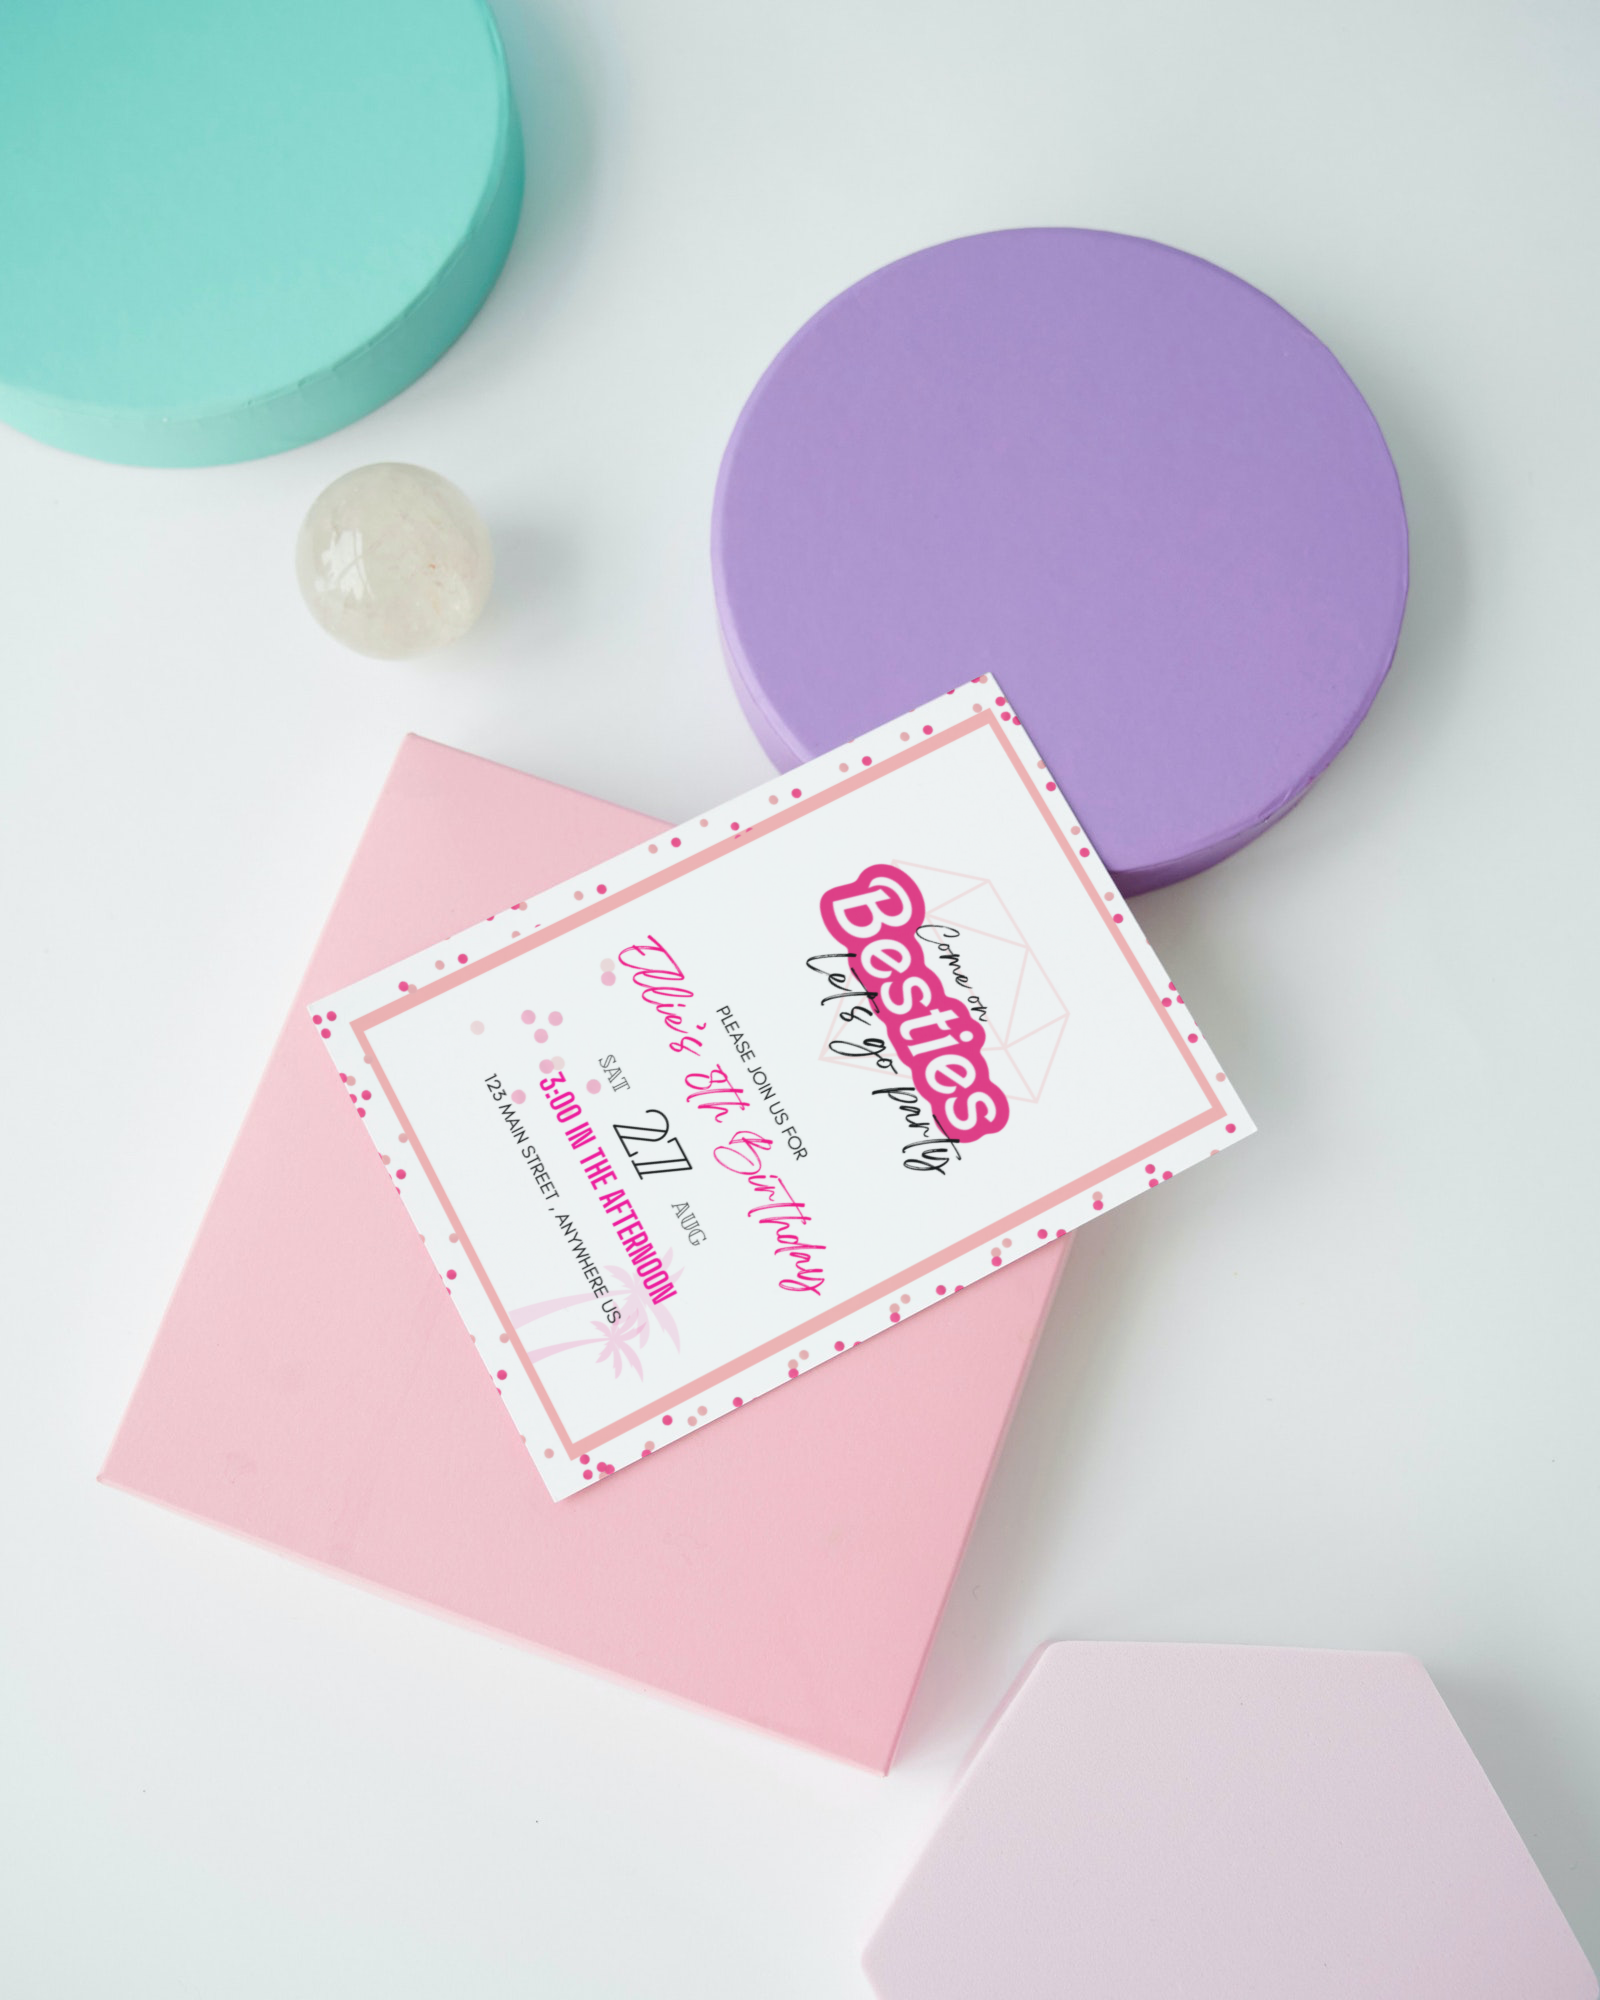 Editable Digital Download: Come on Besties Doll Party Invitation